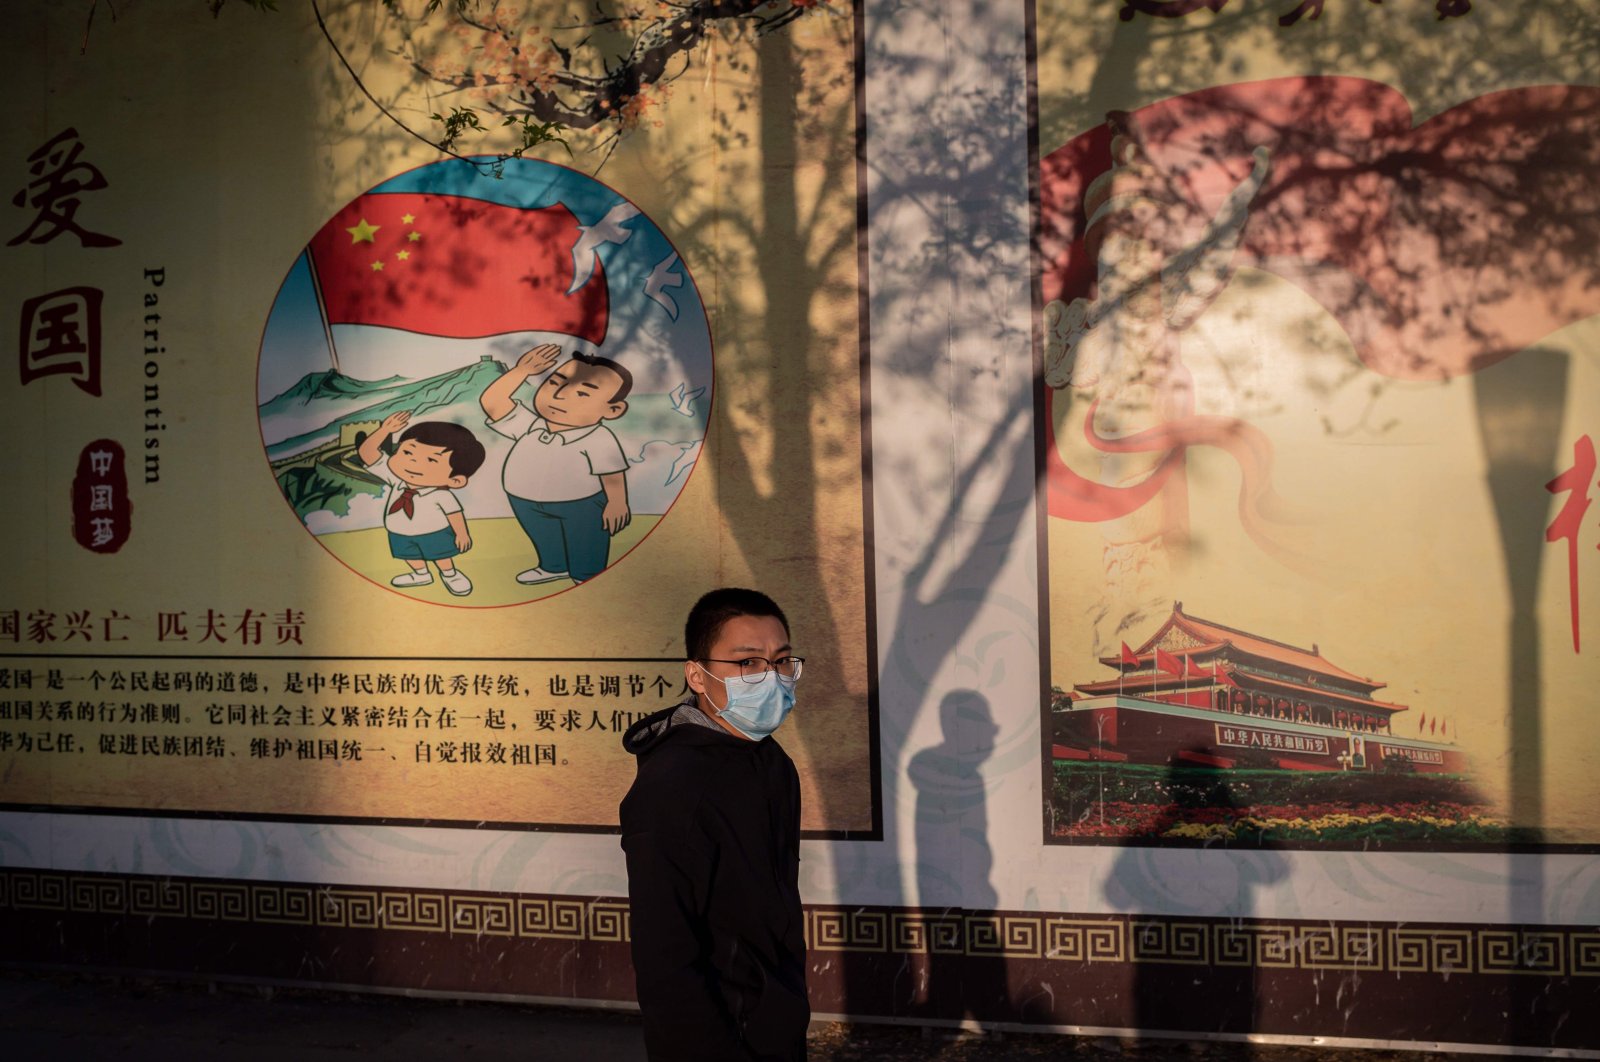 A boy wearing a wearing a facemask as a preventive measure against the COVID-19 coronavirus walks past a propaganda poster outside a shopping mall in Beijing on April 1, 2020. (AFP Photo)